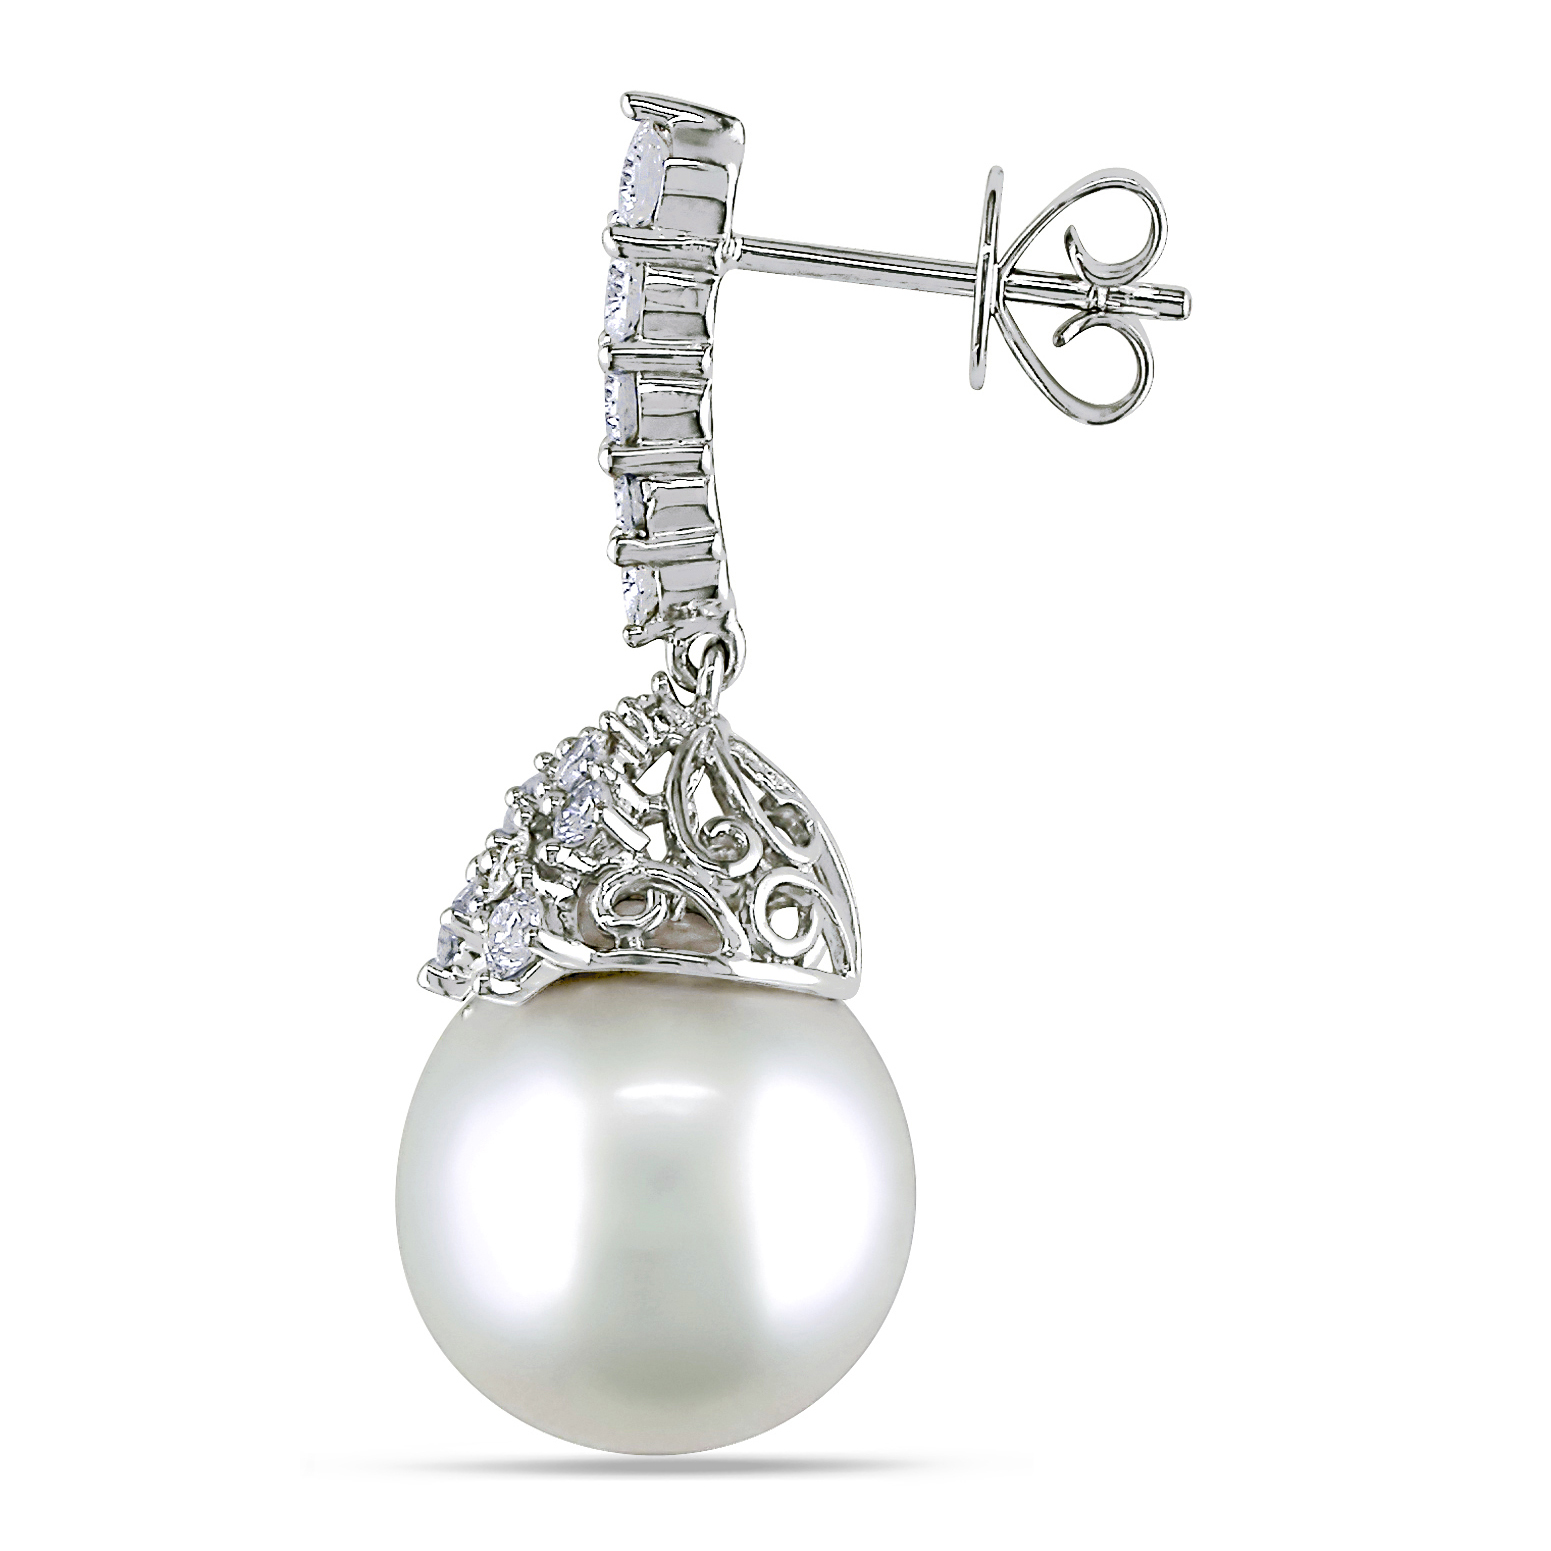 10.5 - 11 MM South Sea Cultured Pearl and 1 CT TW Diamond Drop Earrings in 14k White Gold